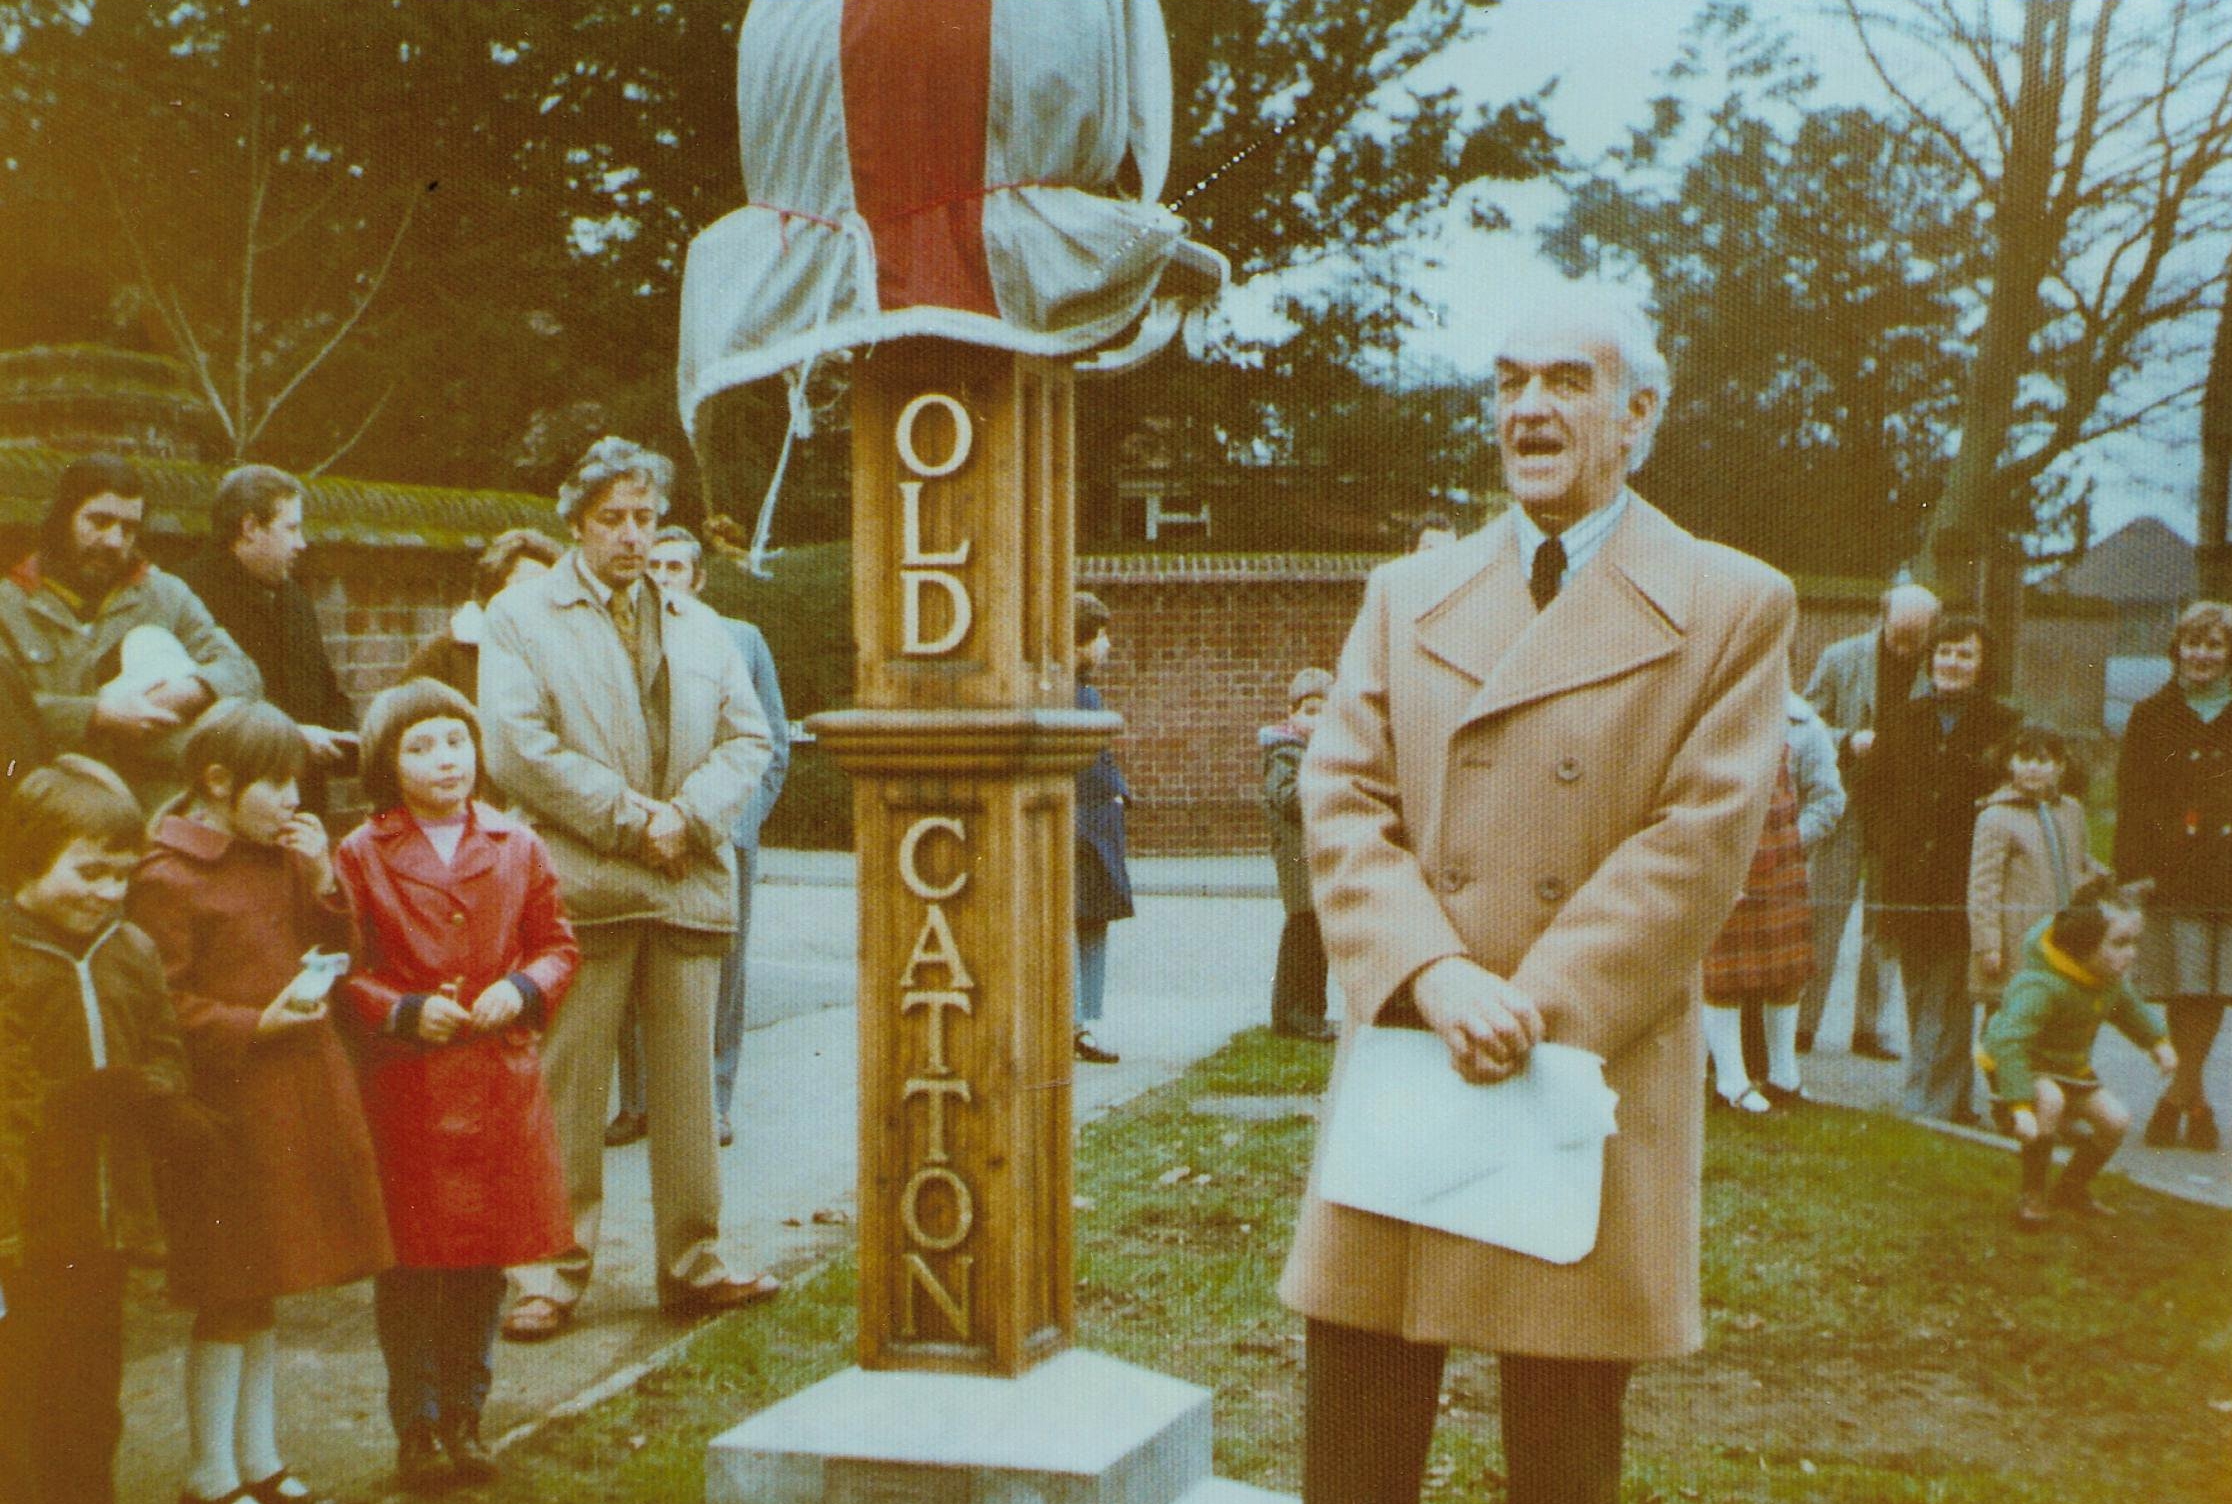  Sign unveiling by Parish chairman Bill Catton November 1976